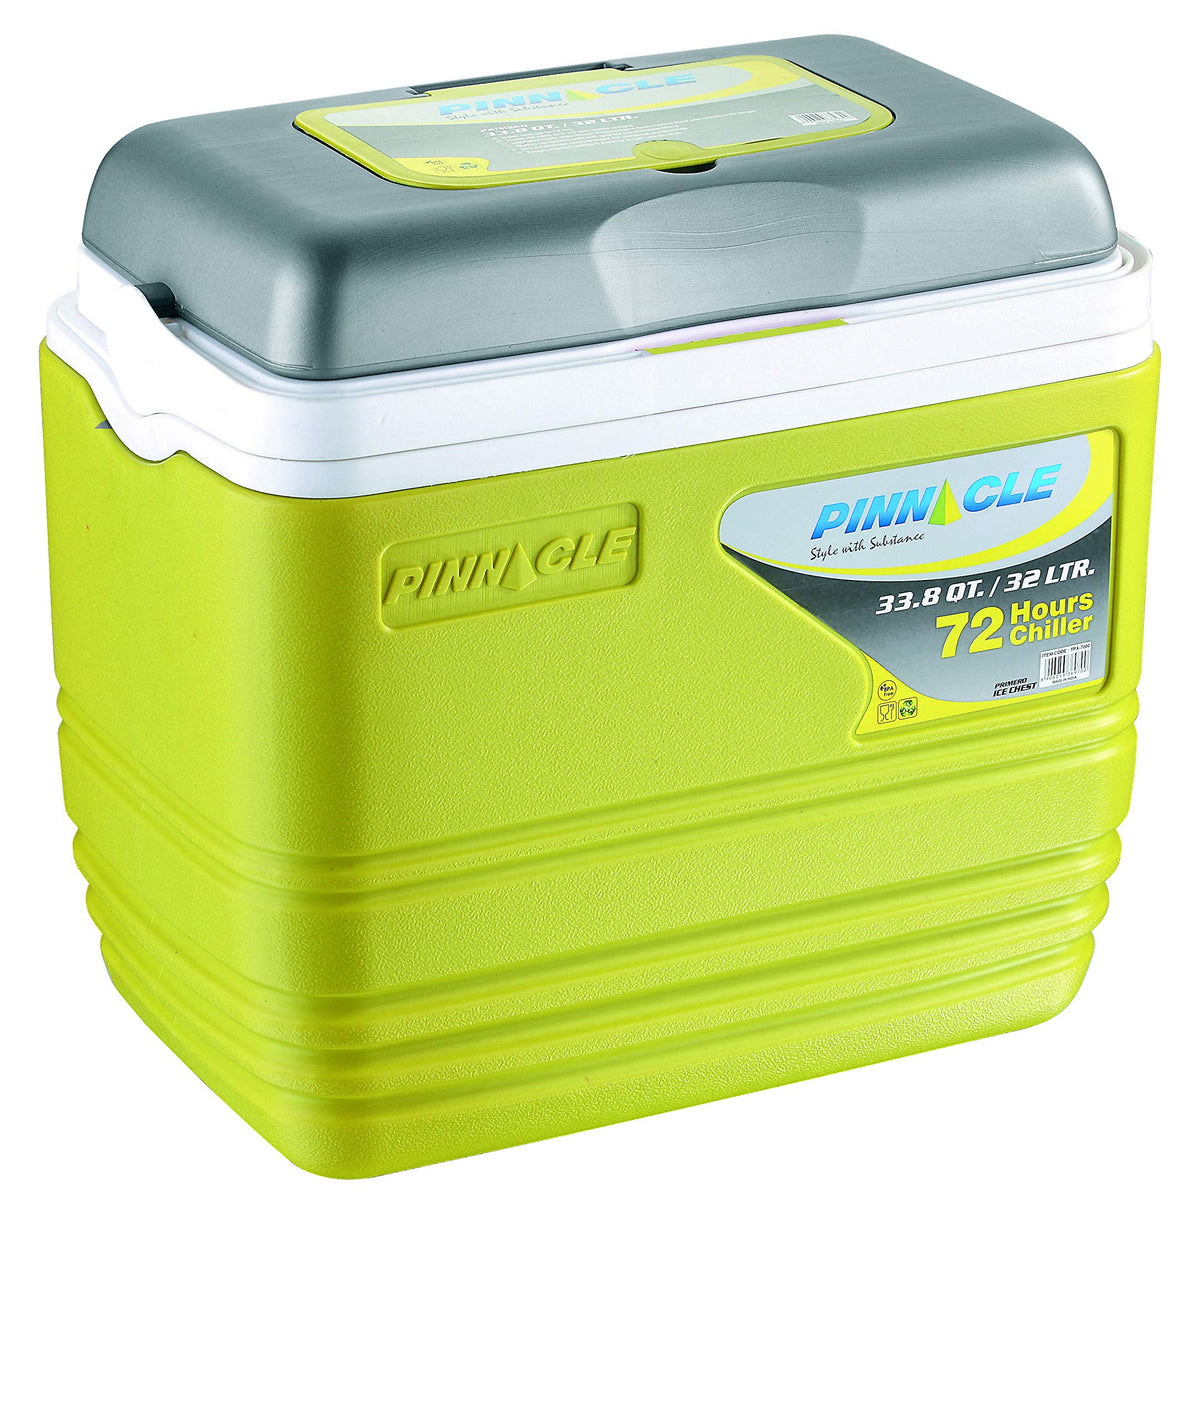 Pinnacle Primero Ice Cooler Box | Keeps Ice Cubes, Cold Drinks Cold Upto 72 Hours | Medical Purpose (32 Litre) (Green)